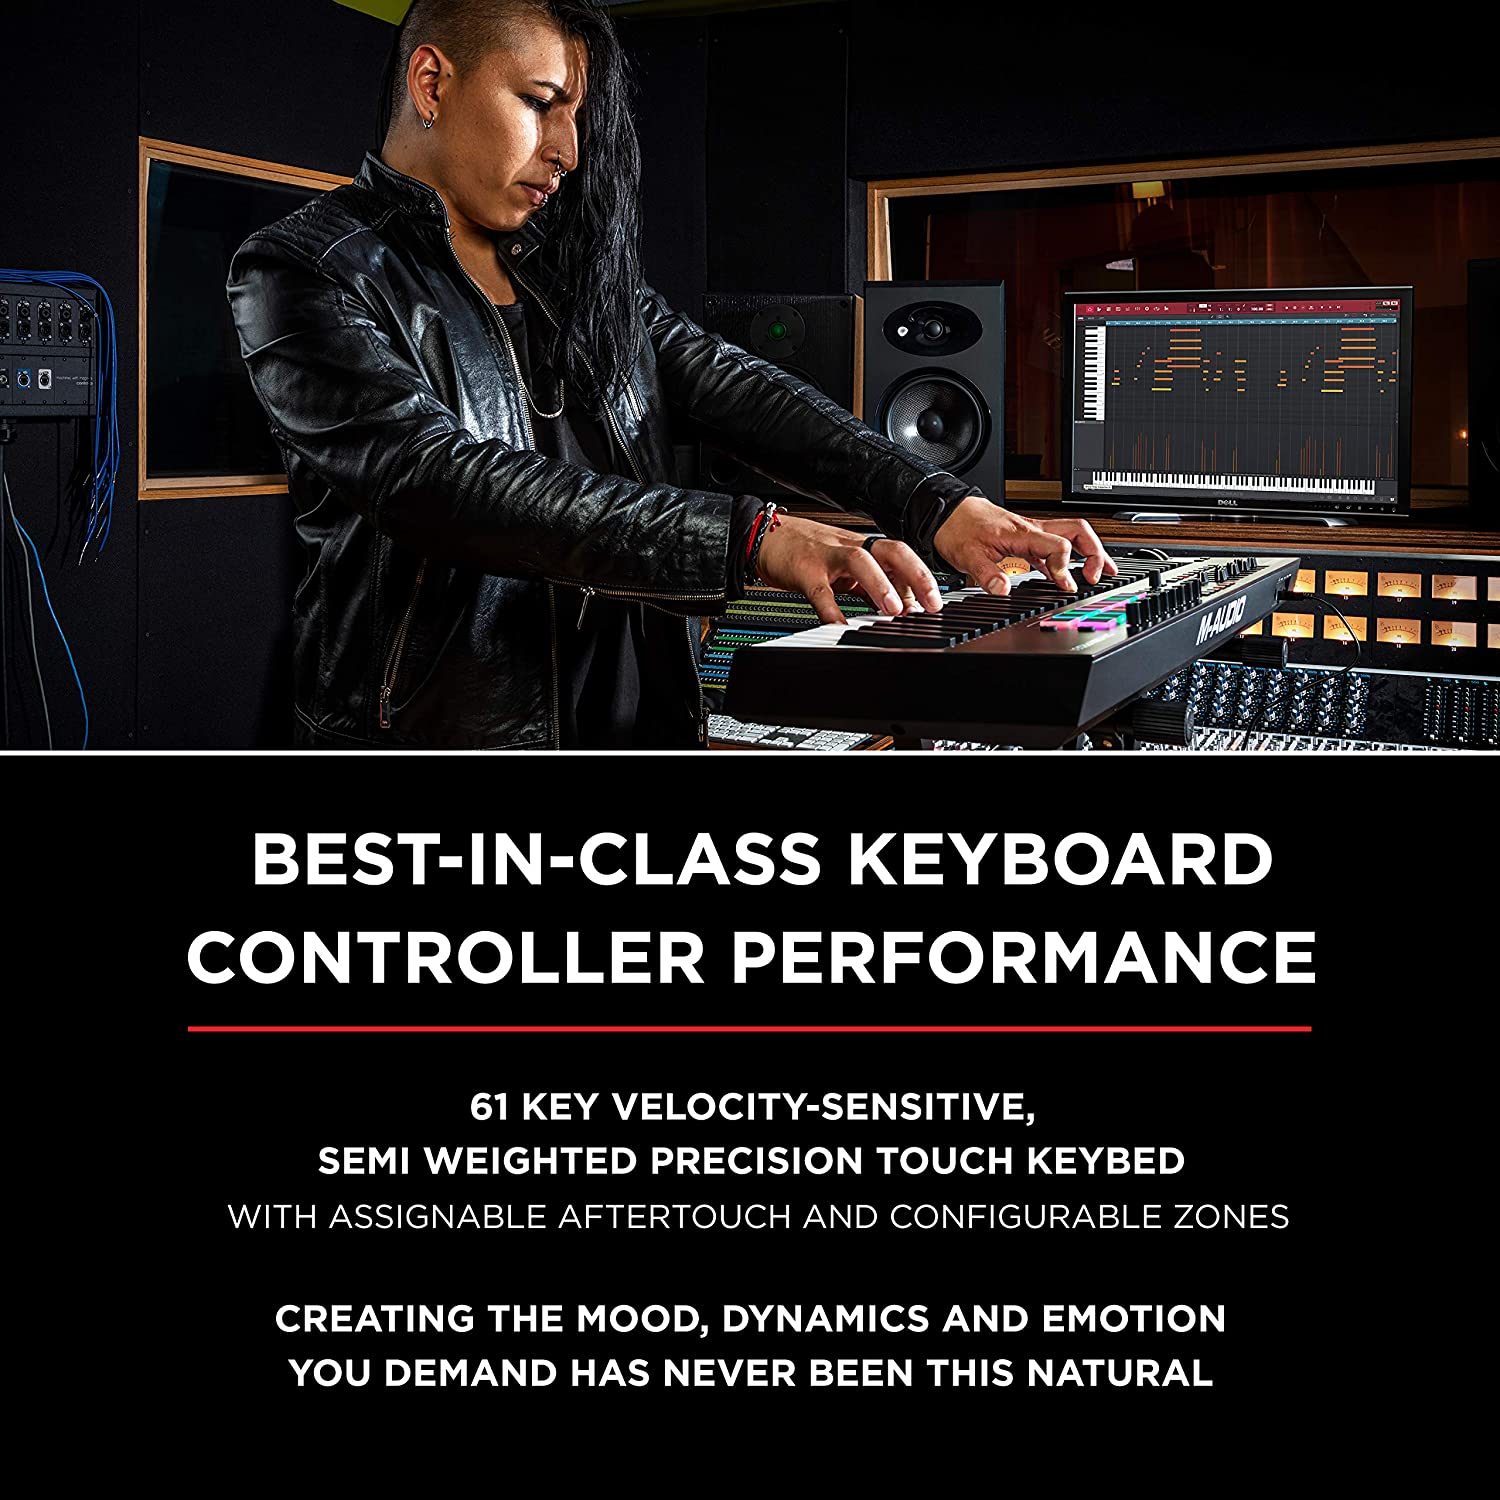 M-Audio Oxygen Pro 61 Key USB MIDI Keyboard Controller with Beat Pads, Assignable knobs, Buttons & faders and Software suite included - image 2 of 5